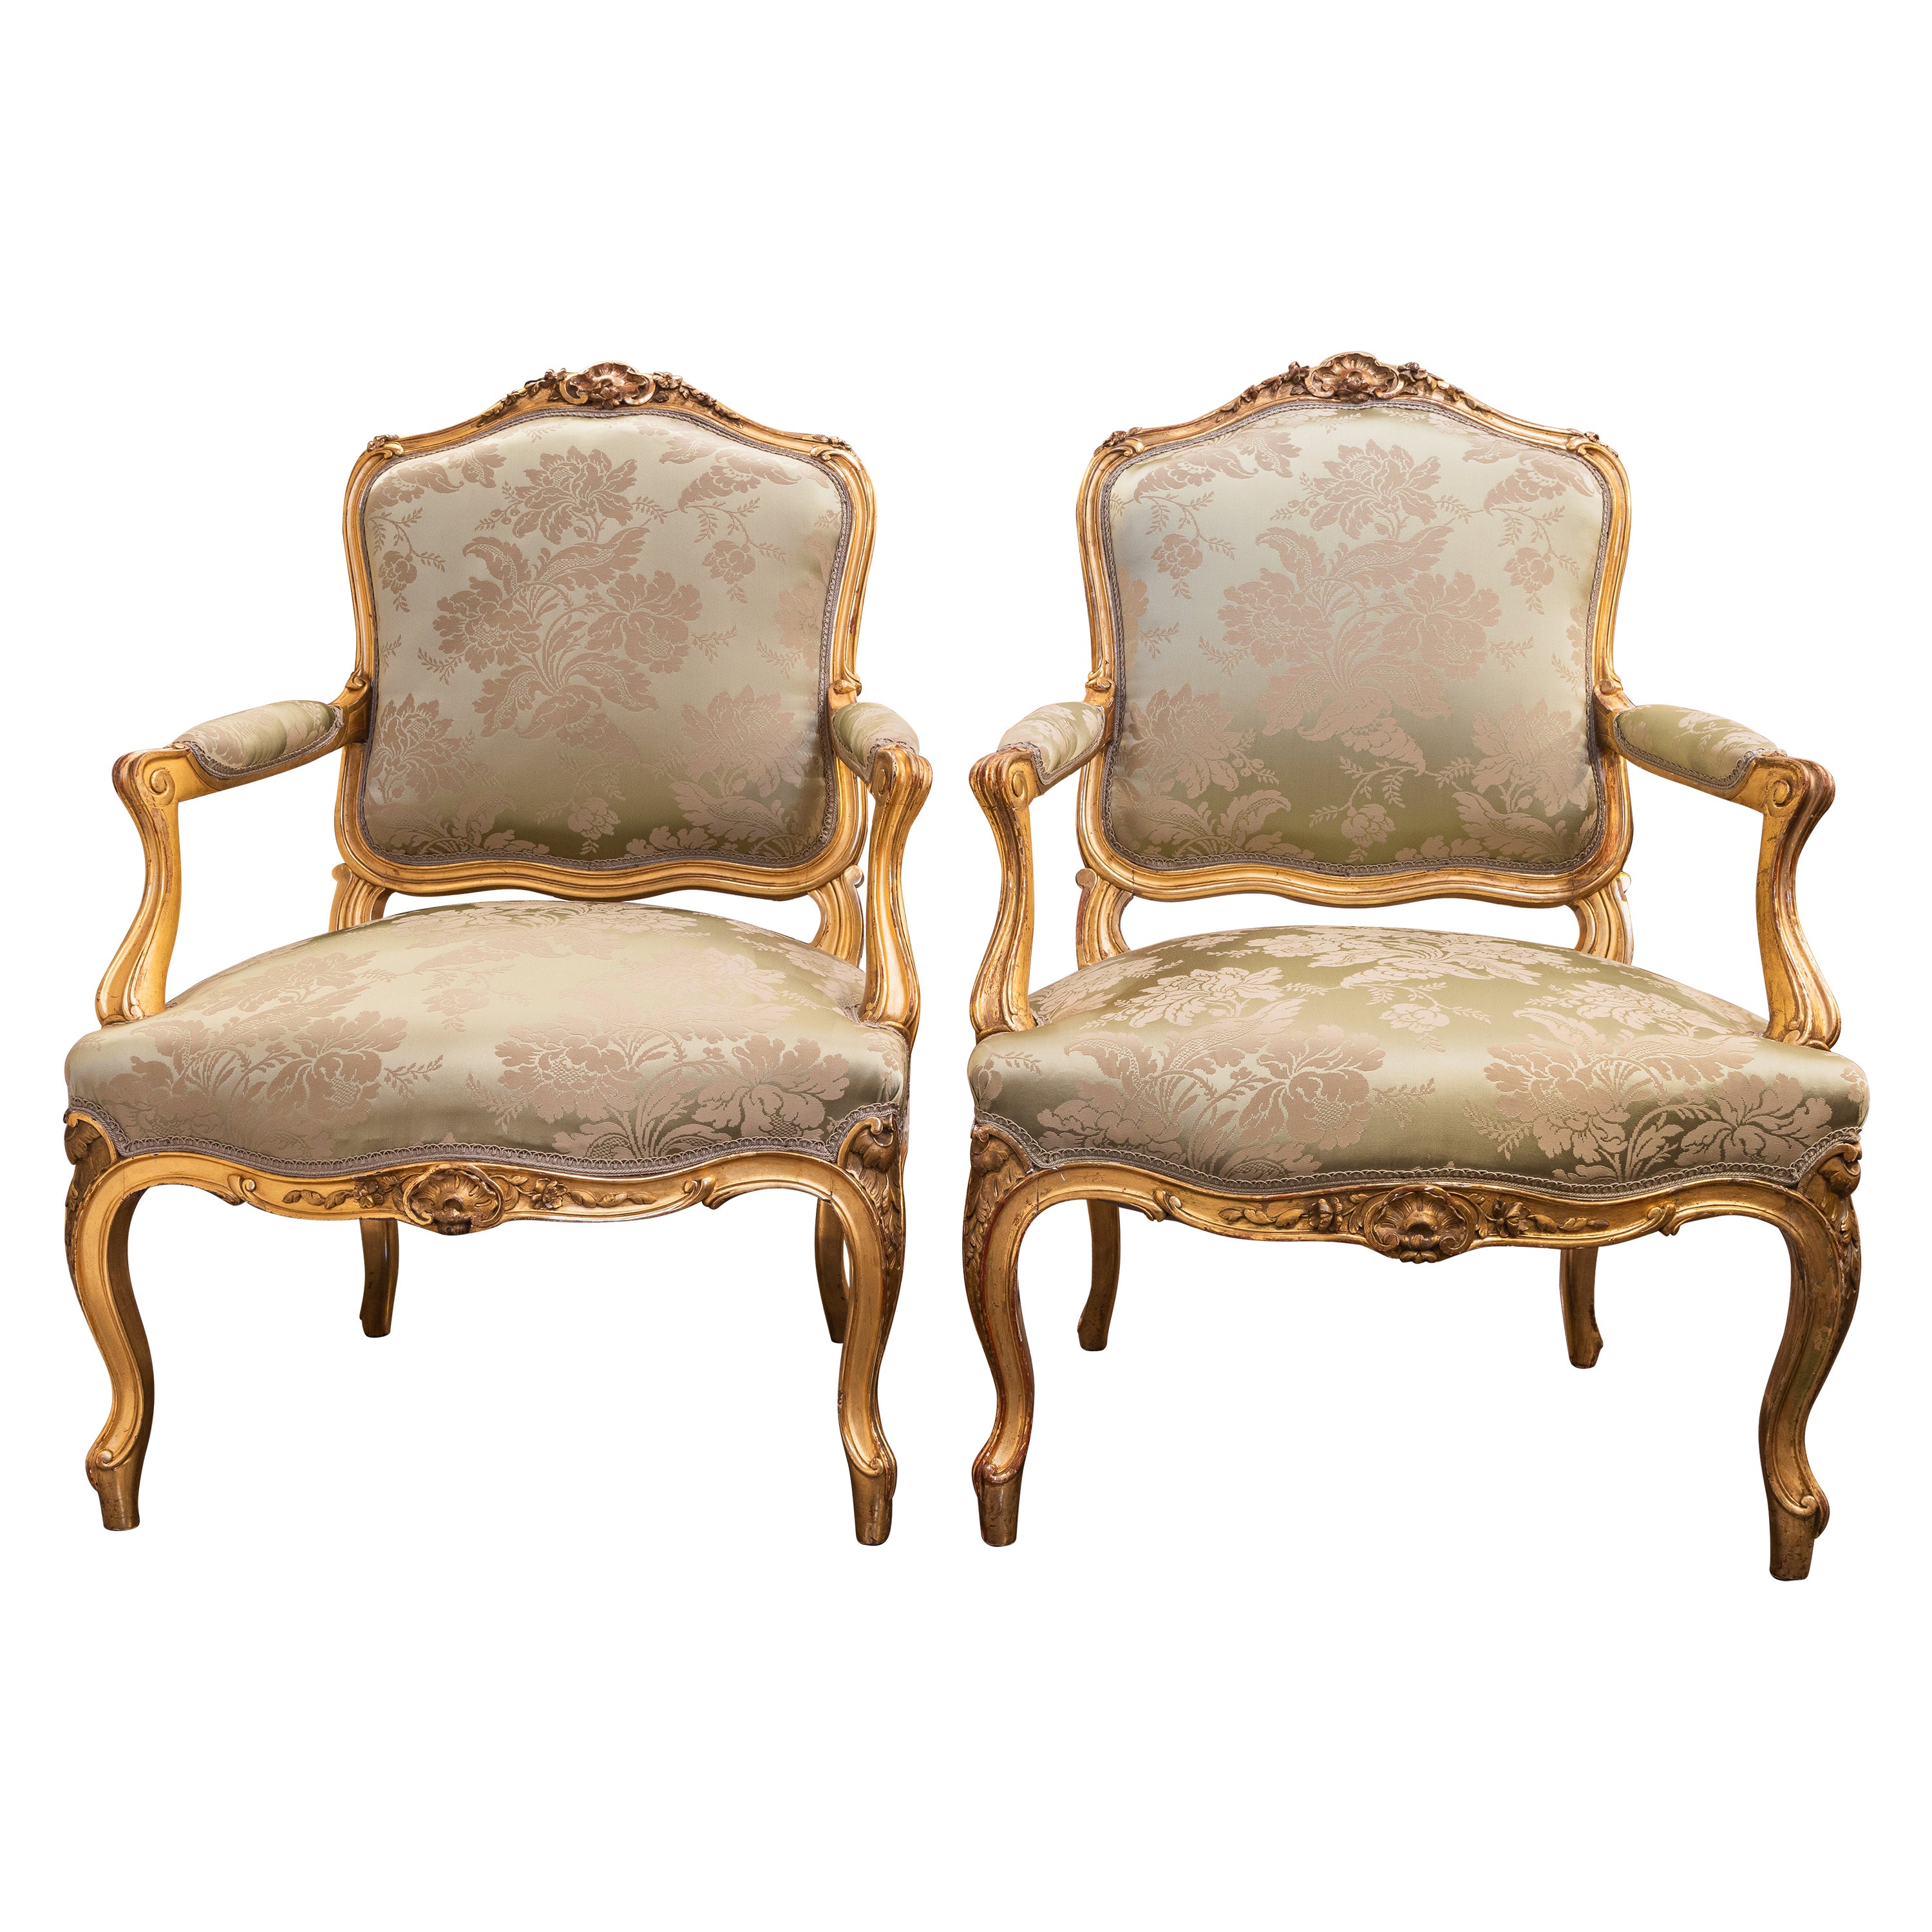 A fine pair of 19th c Louis XV water gilt fauteuils . Fine carving with a silk 